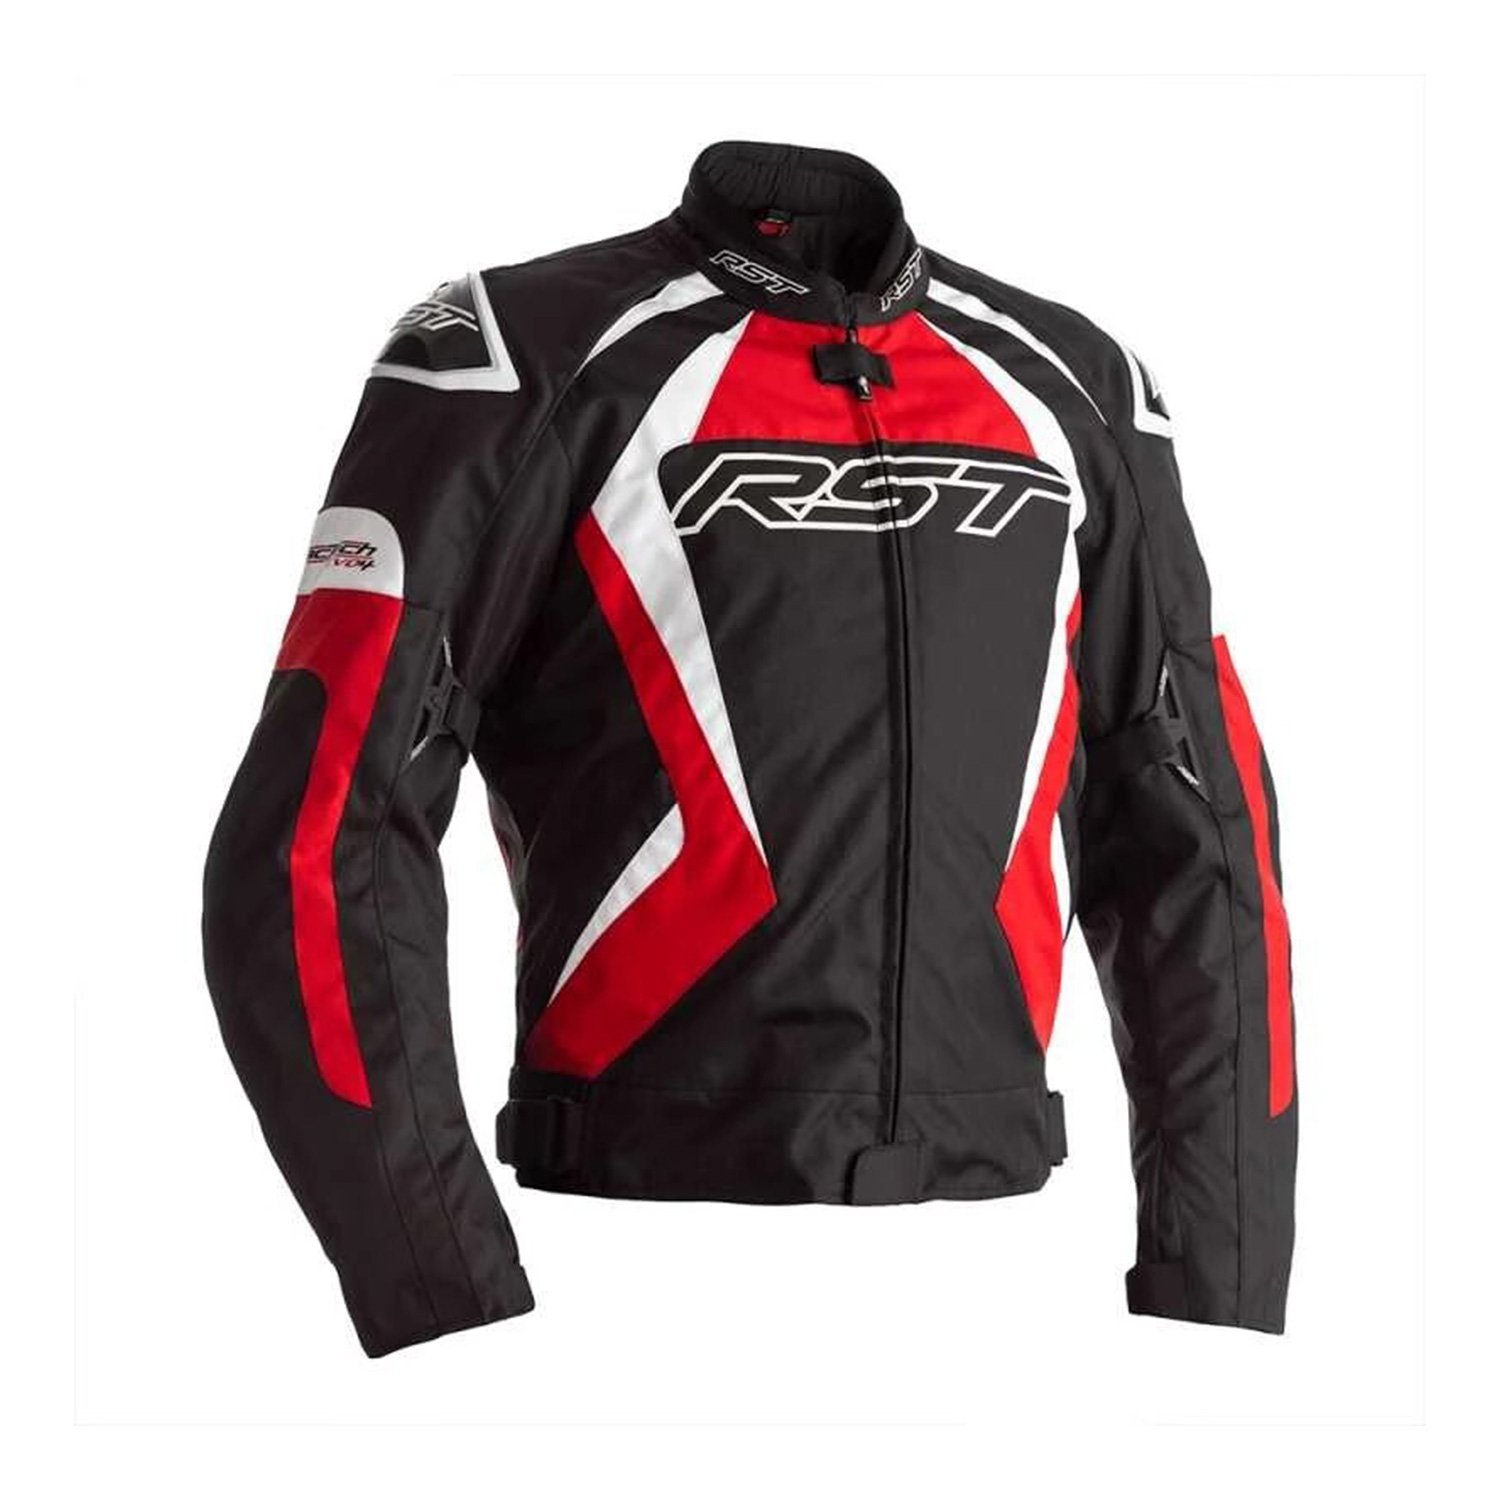 Image of RST Tractech Evo 4 CE Jacket Black Red White Talla 40